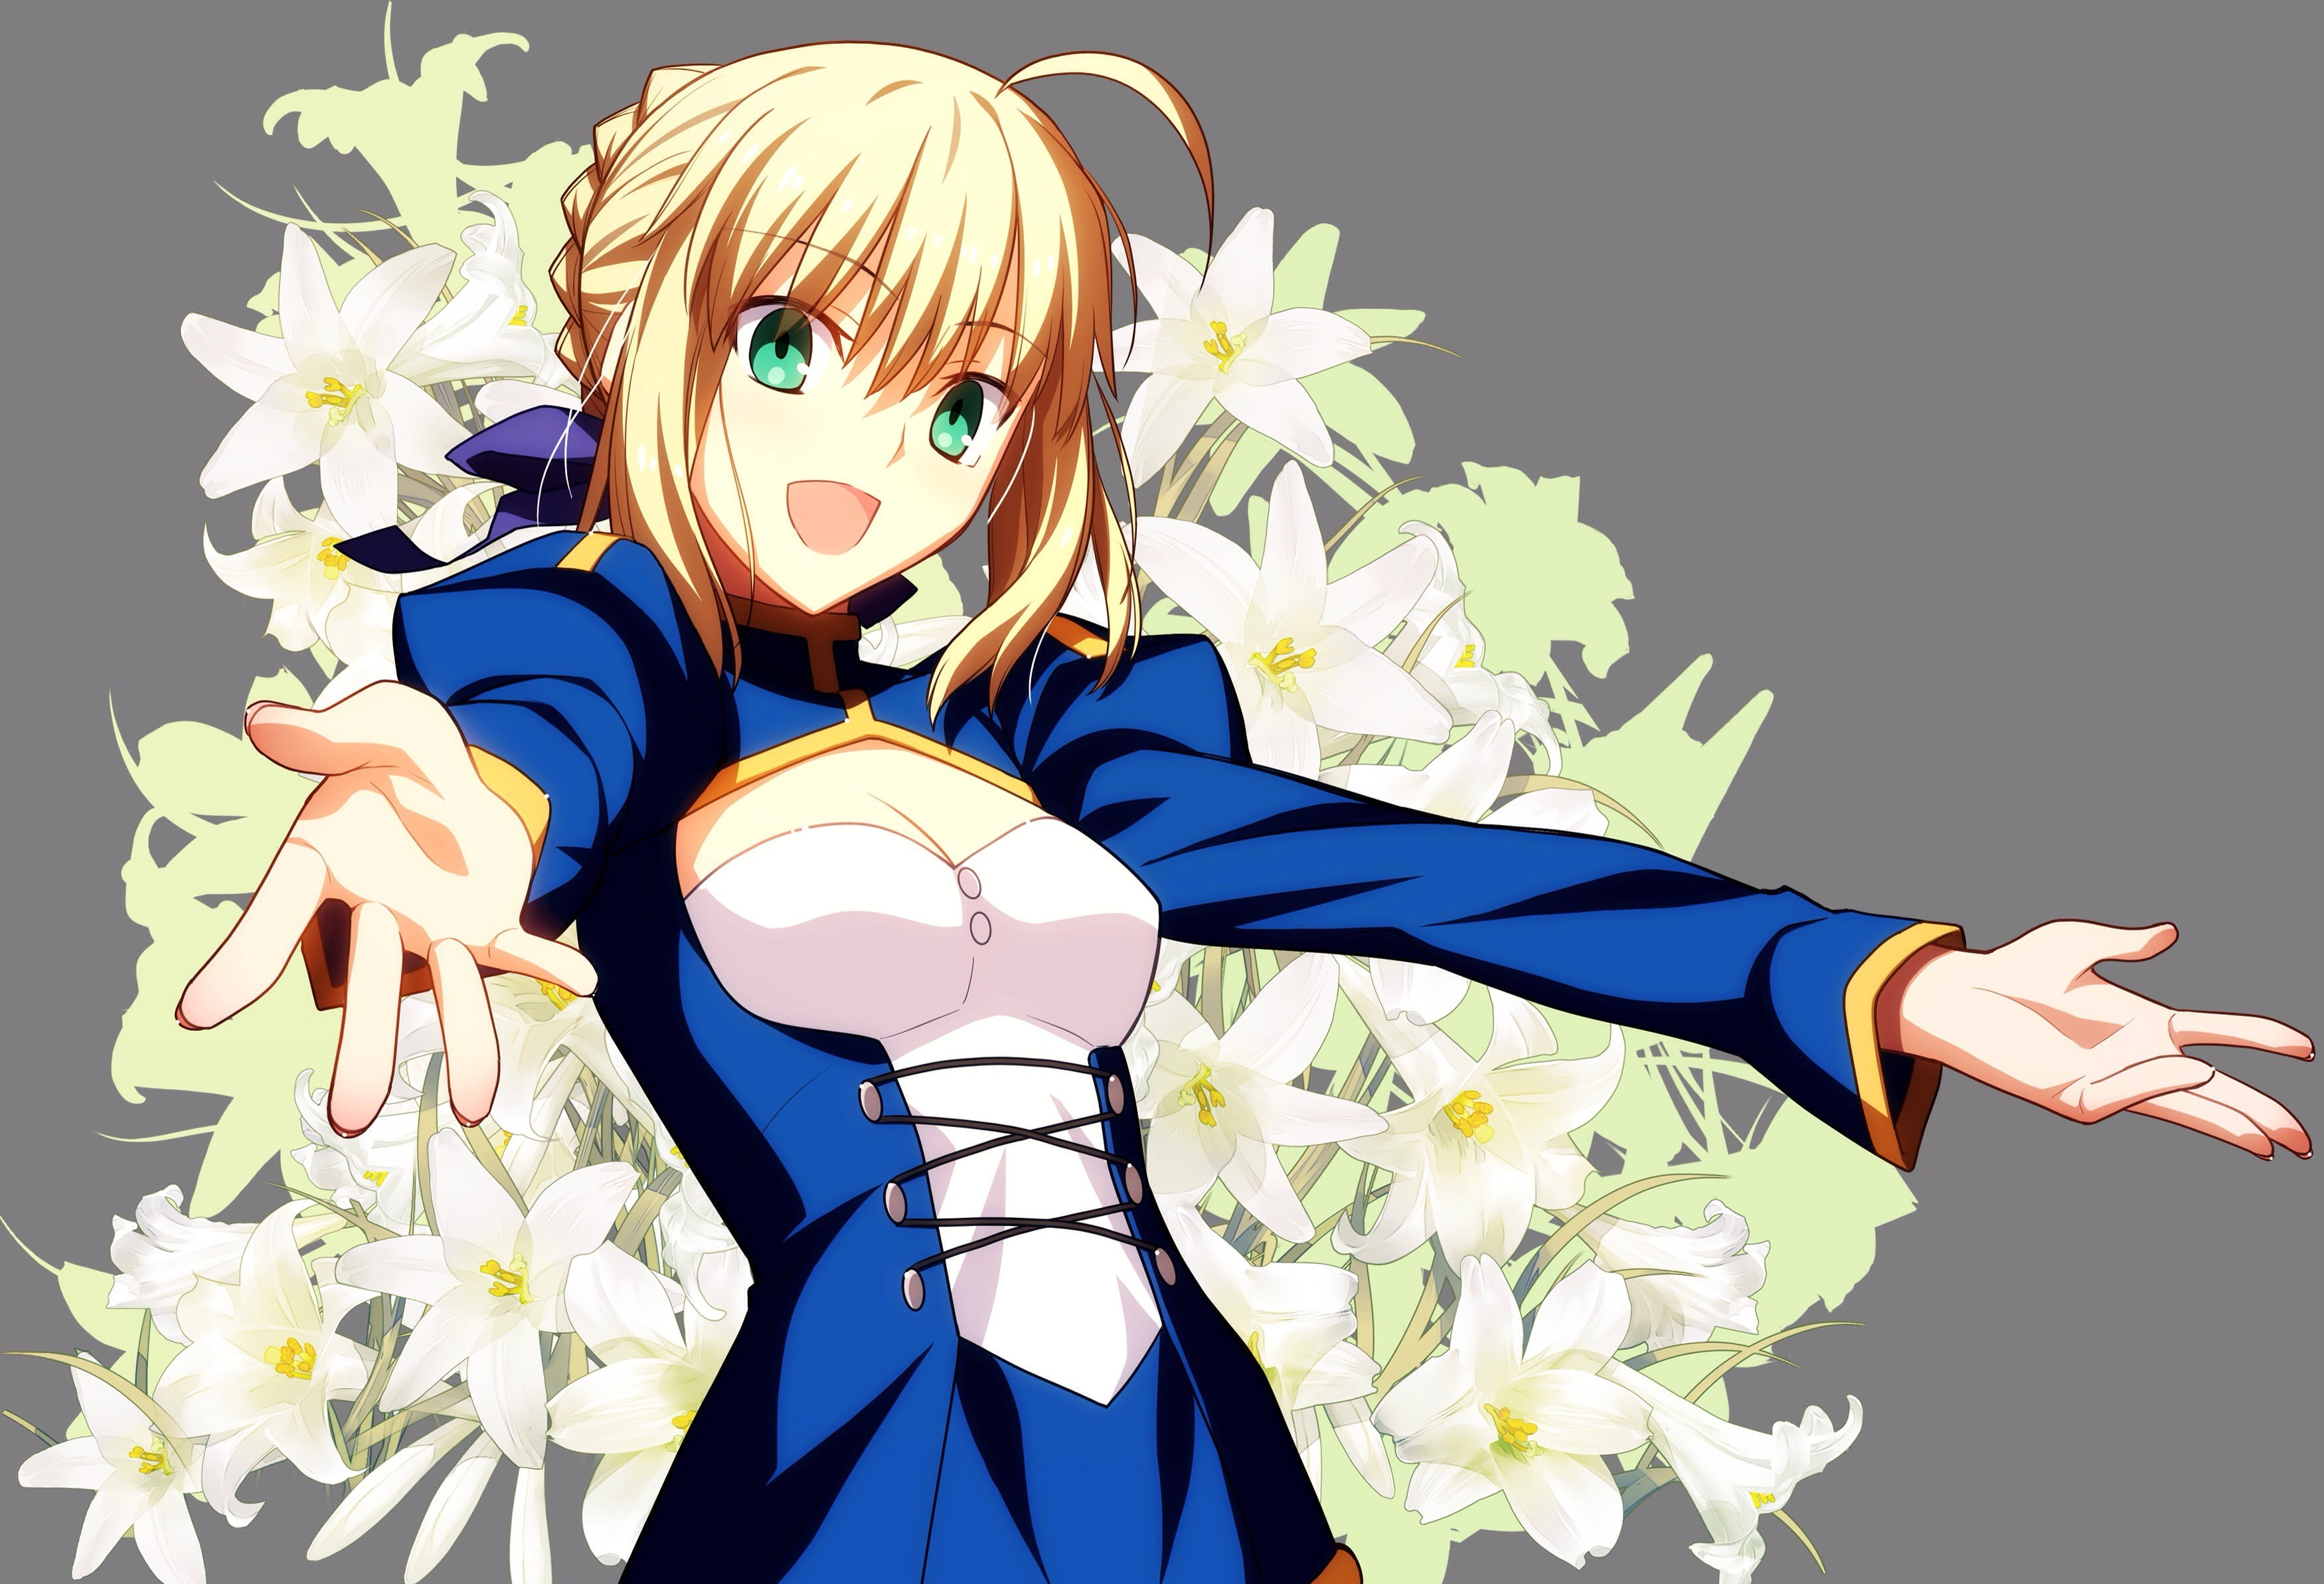 Saber (Fate/stay night) - wide 5